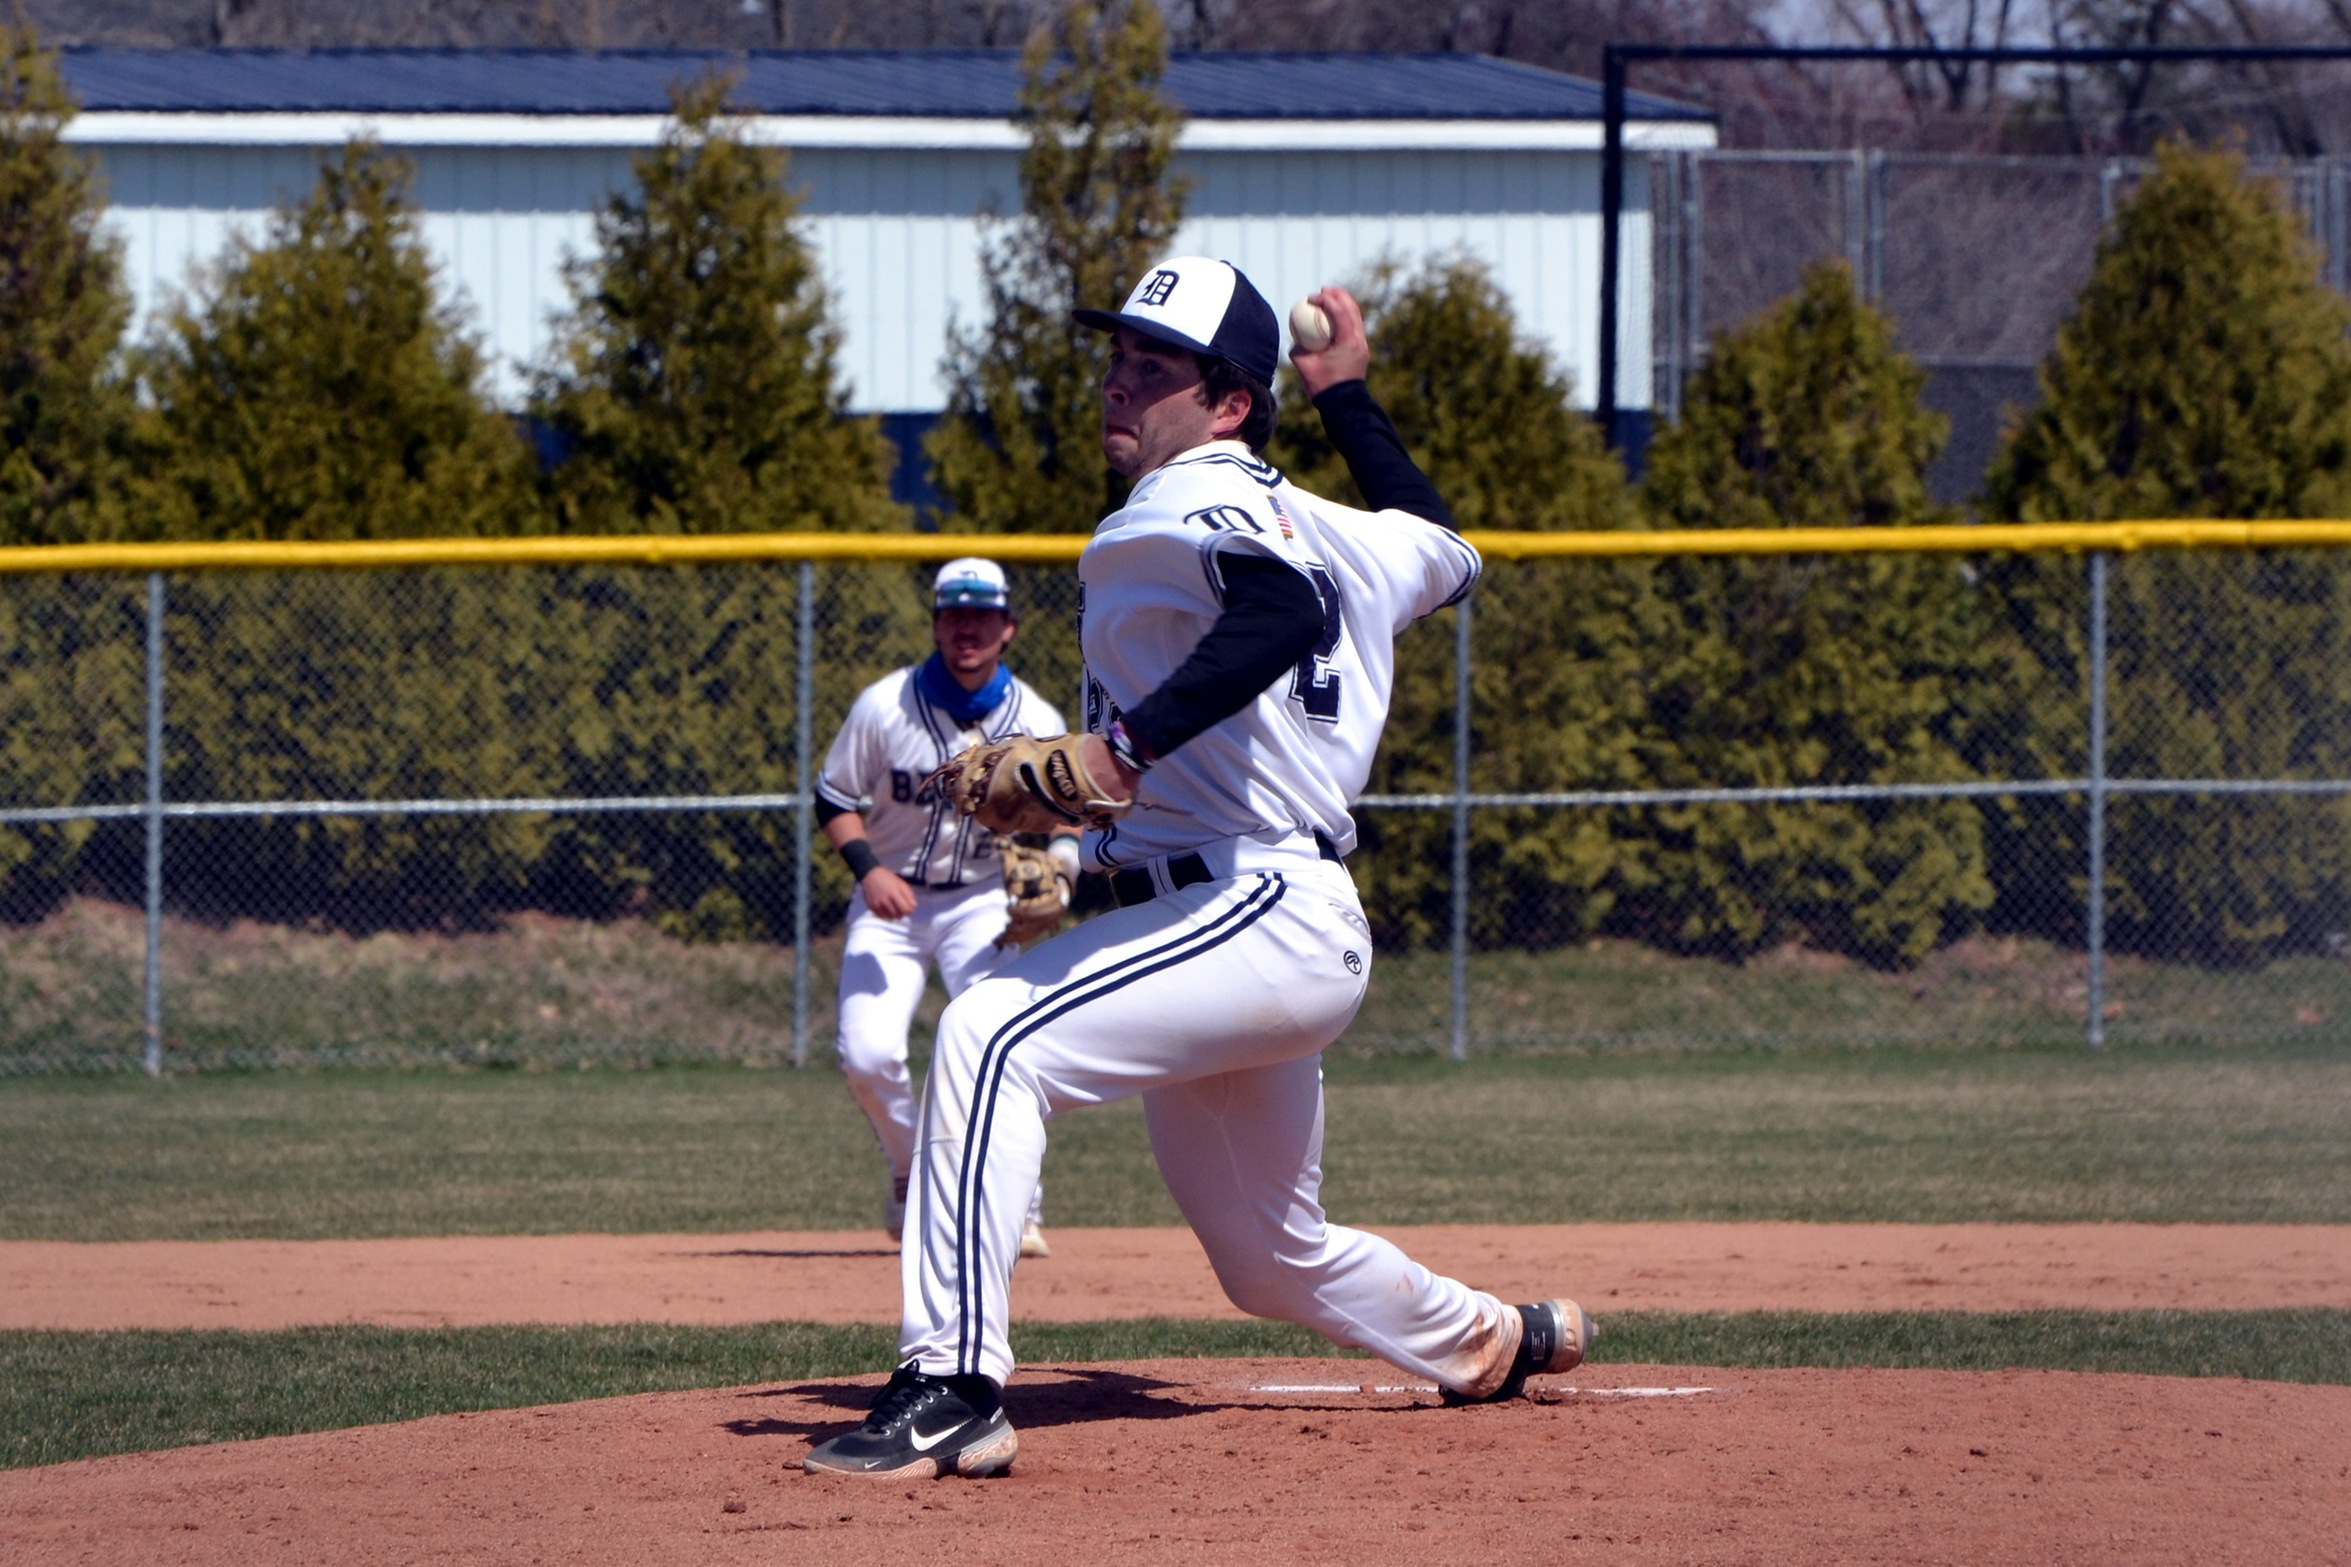 DMACC baseball team sweeps doubleheader from Marshalltown Community College, 8-0 and 18-6